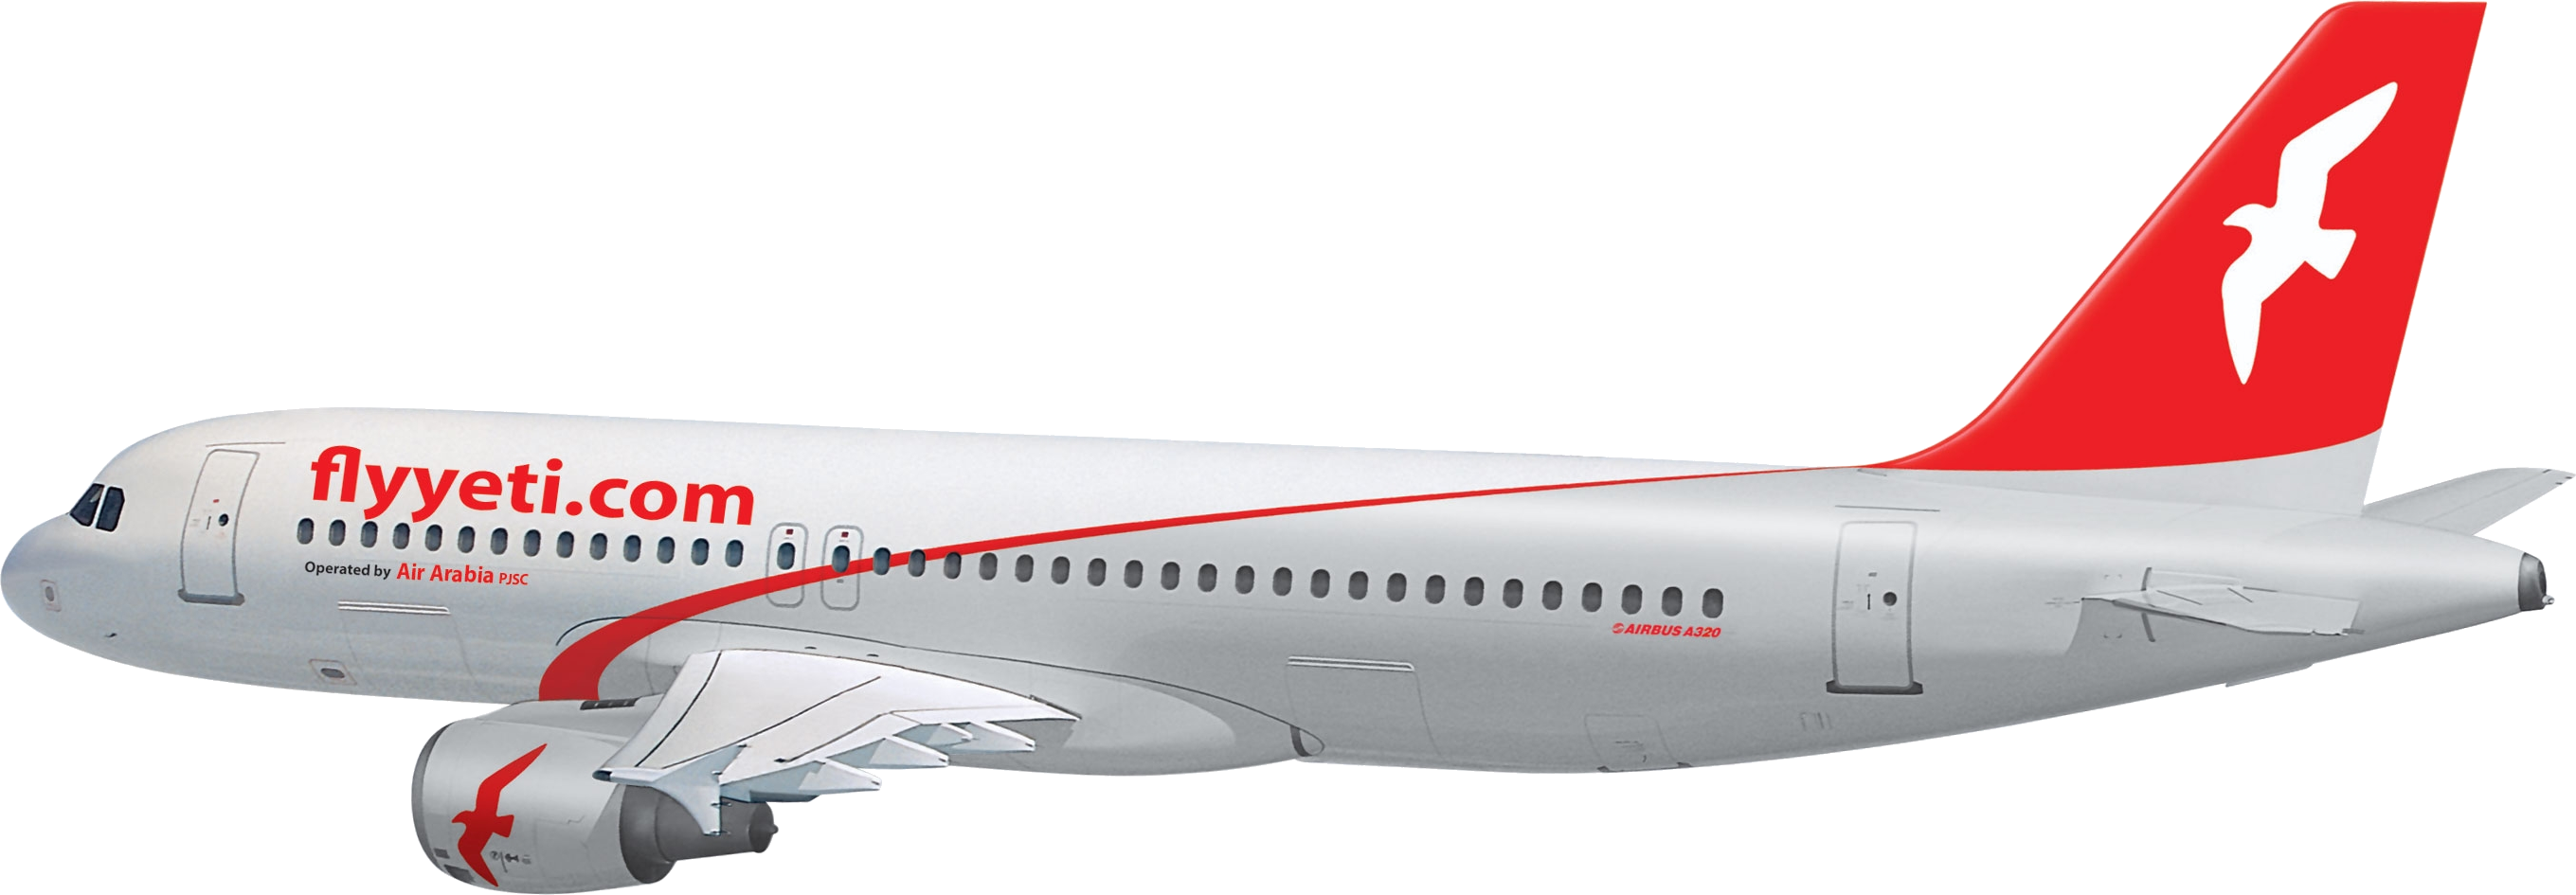 Airplane Flying Pic PNG Image High Quality PNG Image